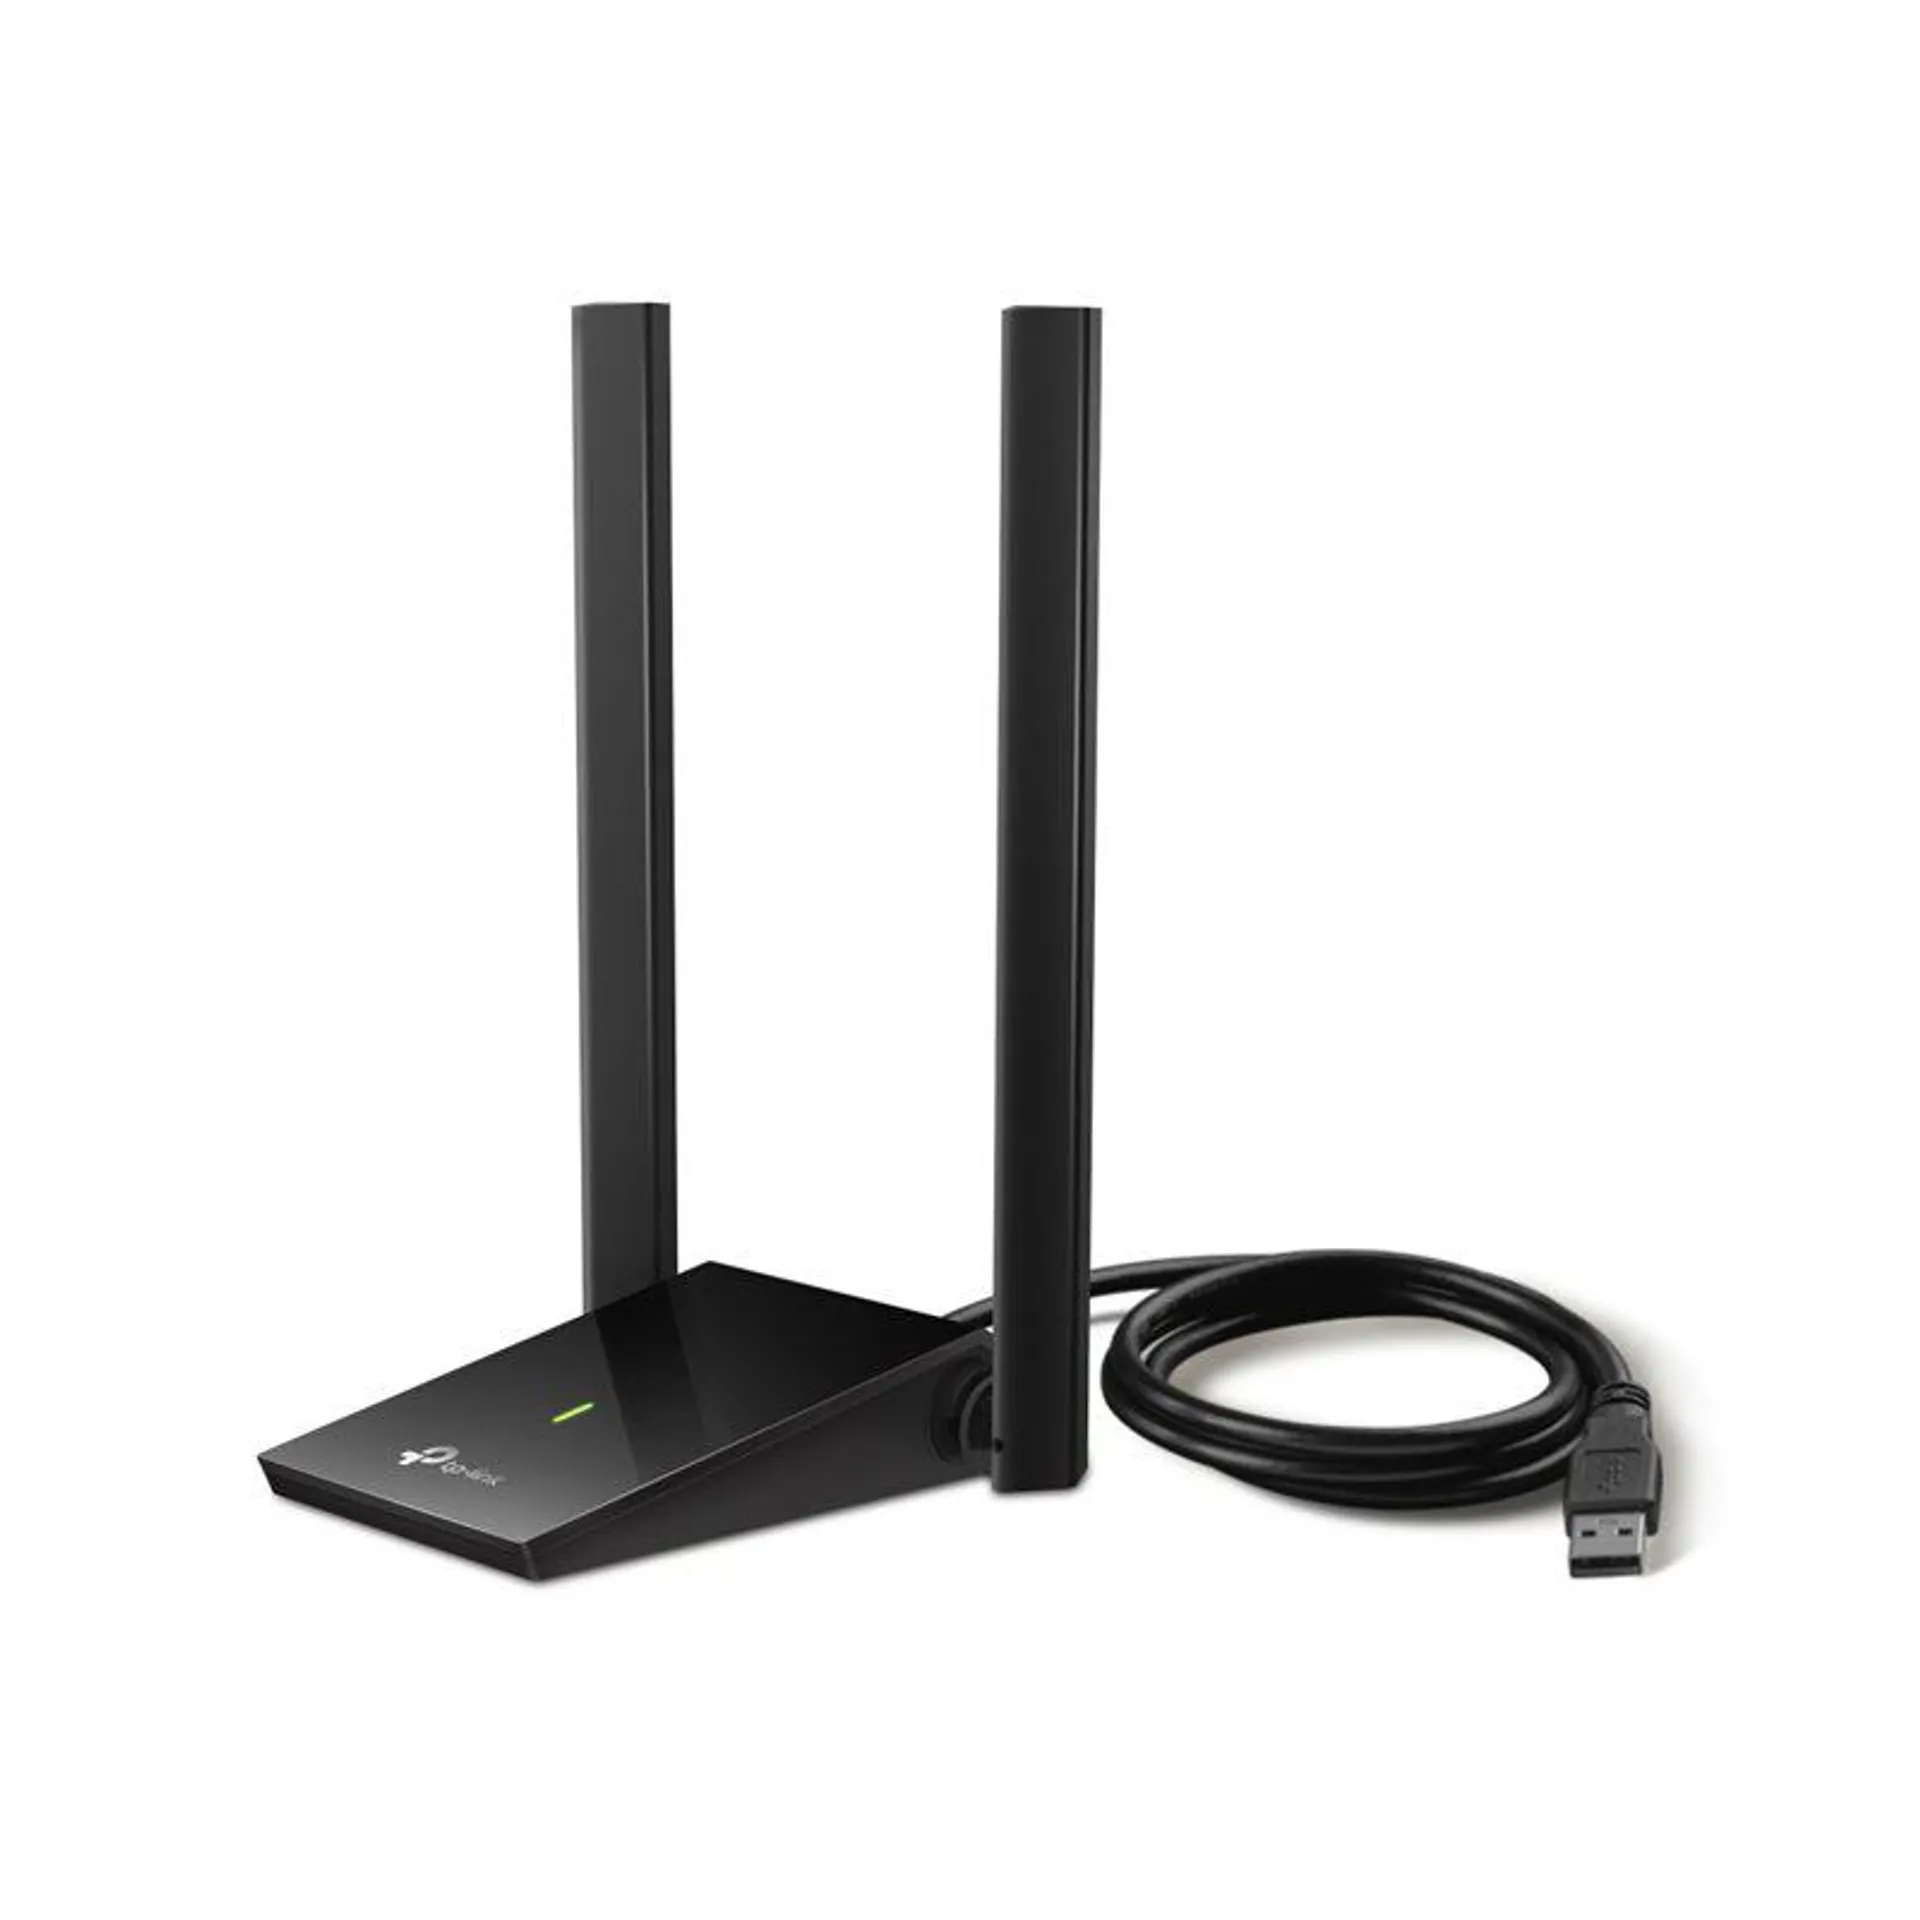 TP-Link Archer T4U Plus Dual-Band AC1300 USB Wi-Fi Adapter with Antenna